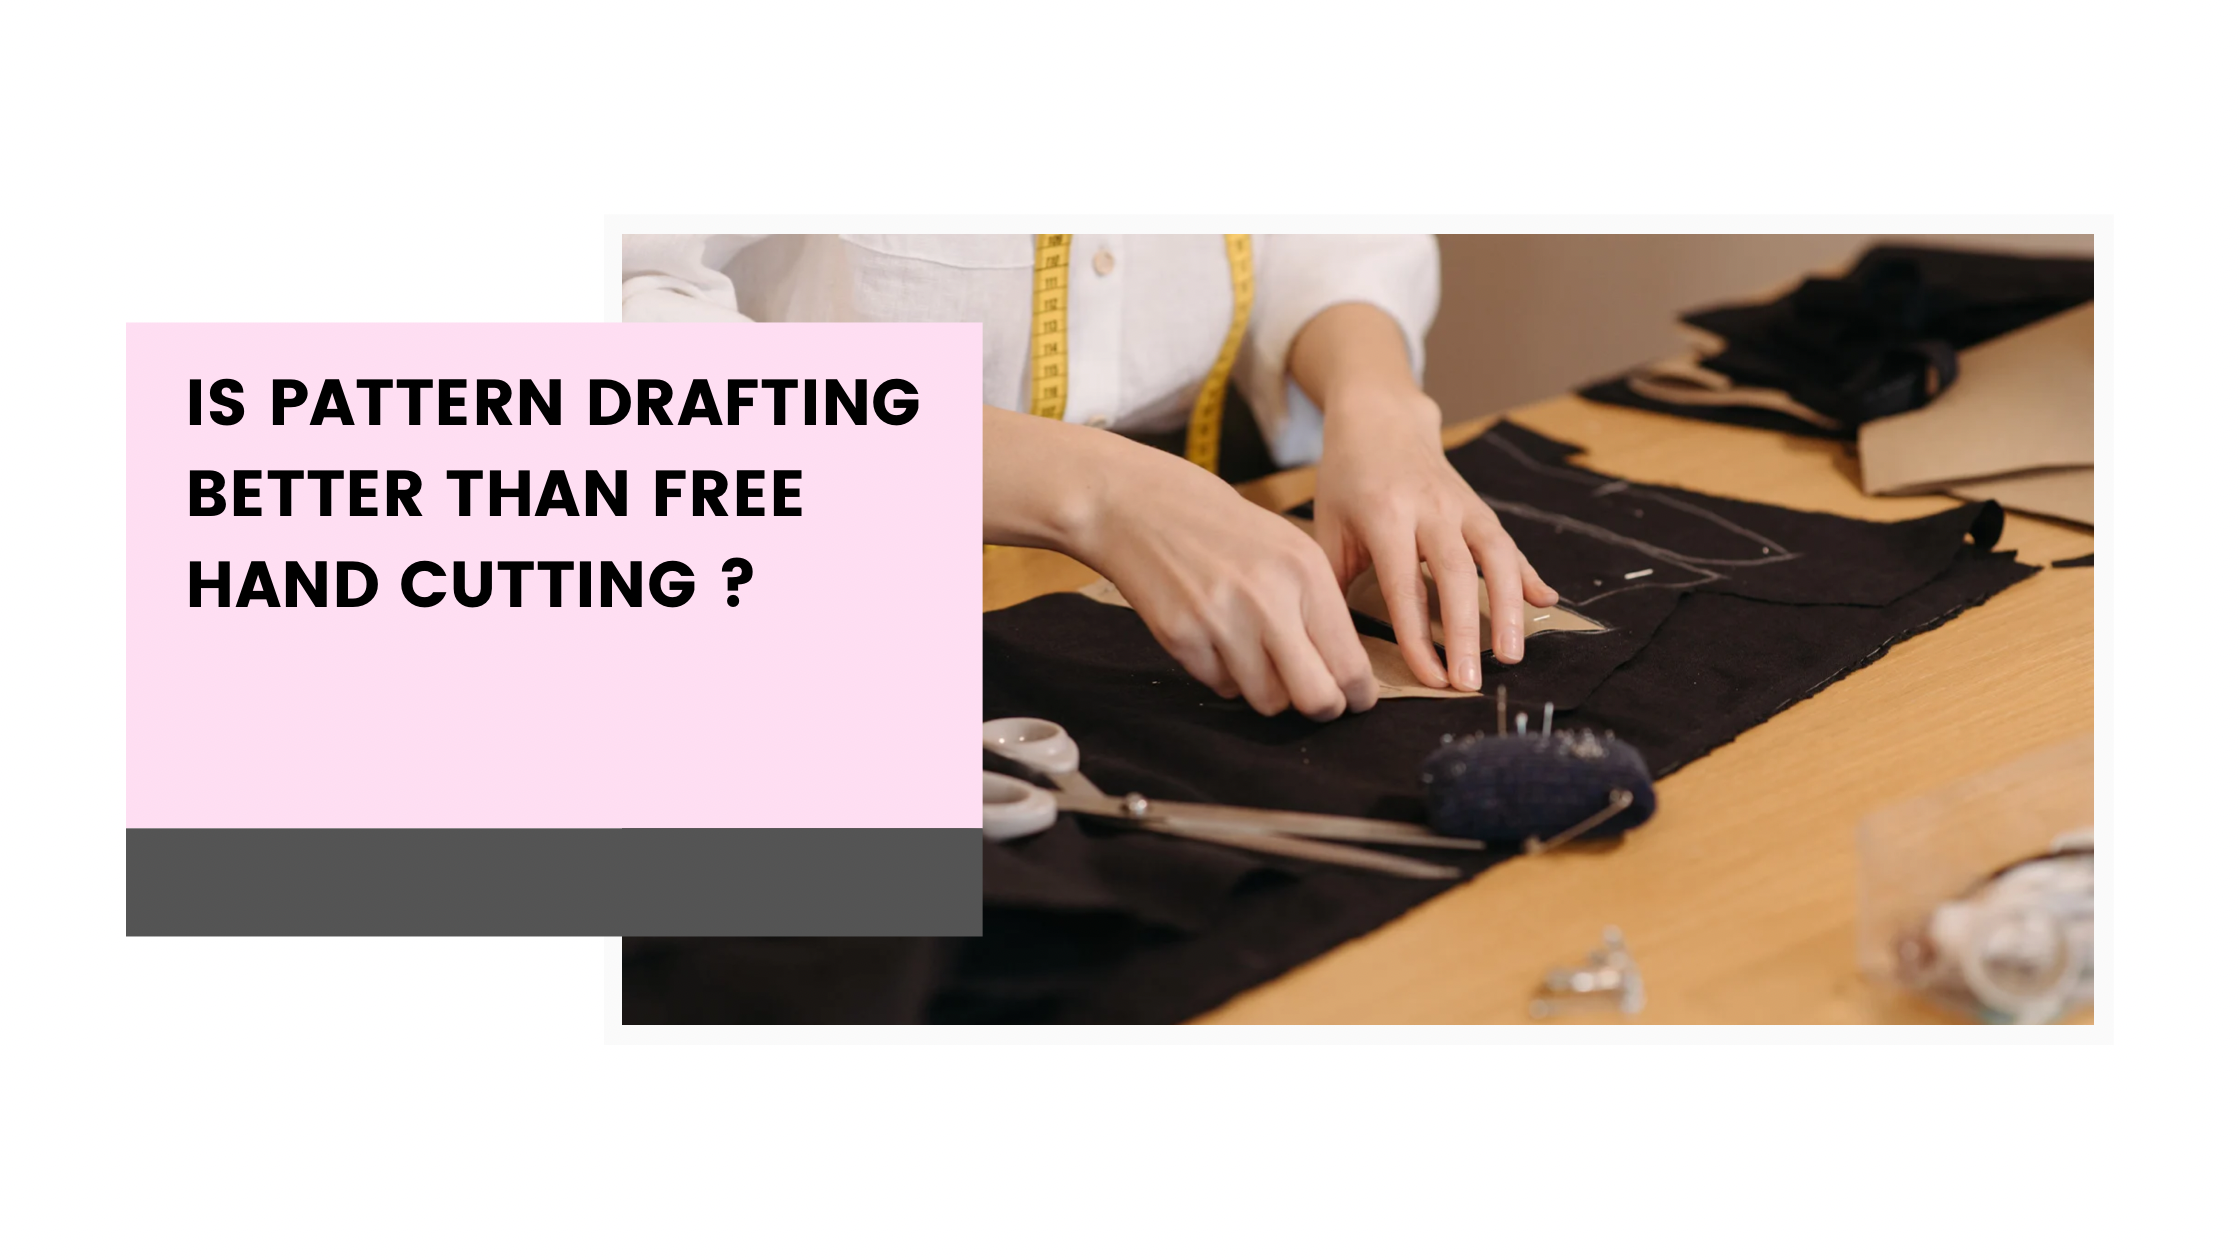 Is pattern drafting better than freehand cutting ?